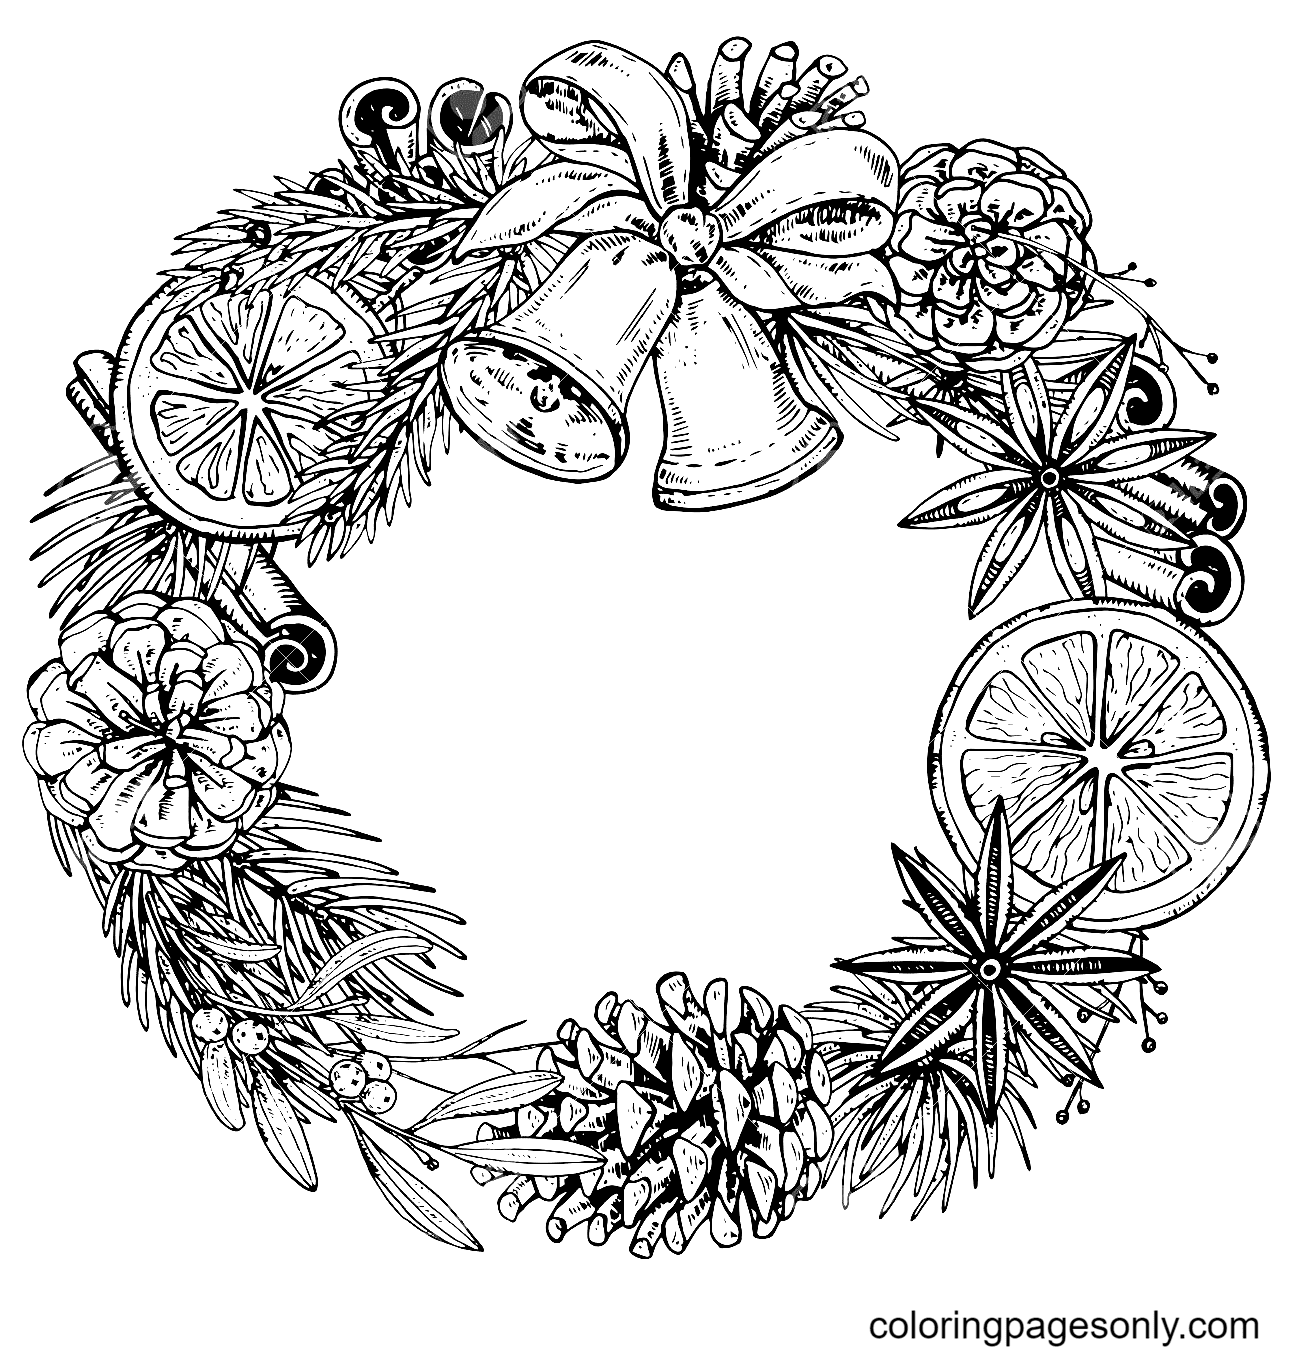 Merry Christmas Wreath with Pine Cones, Spices, Bells Coloring Page